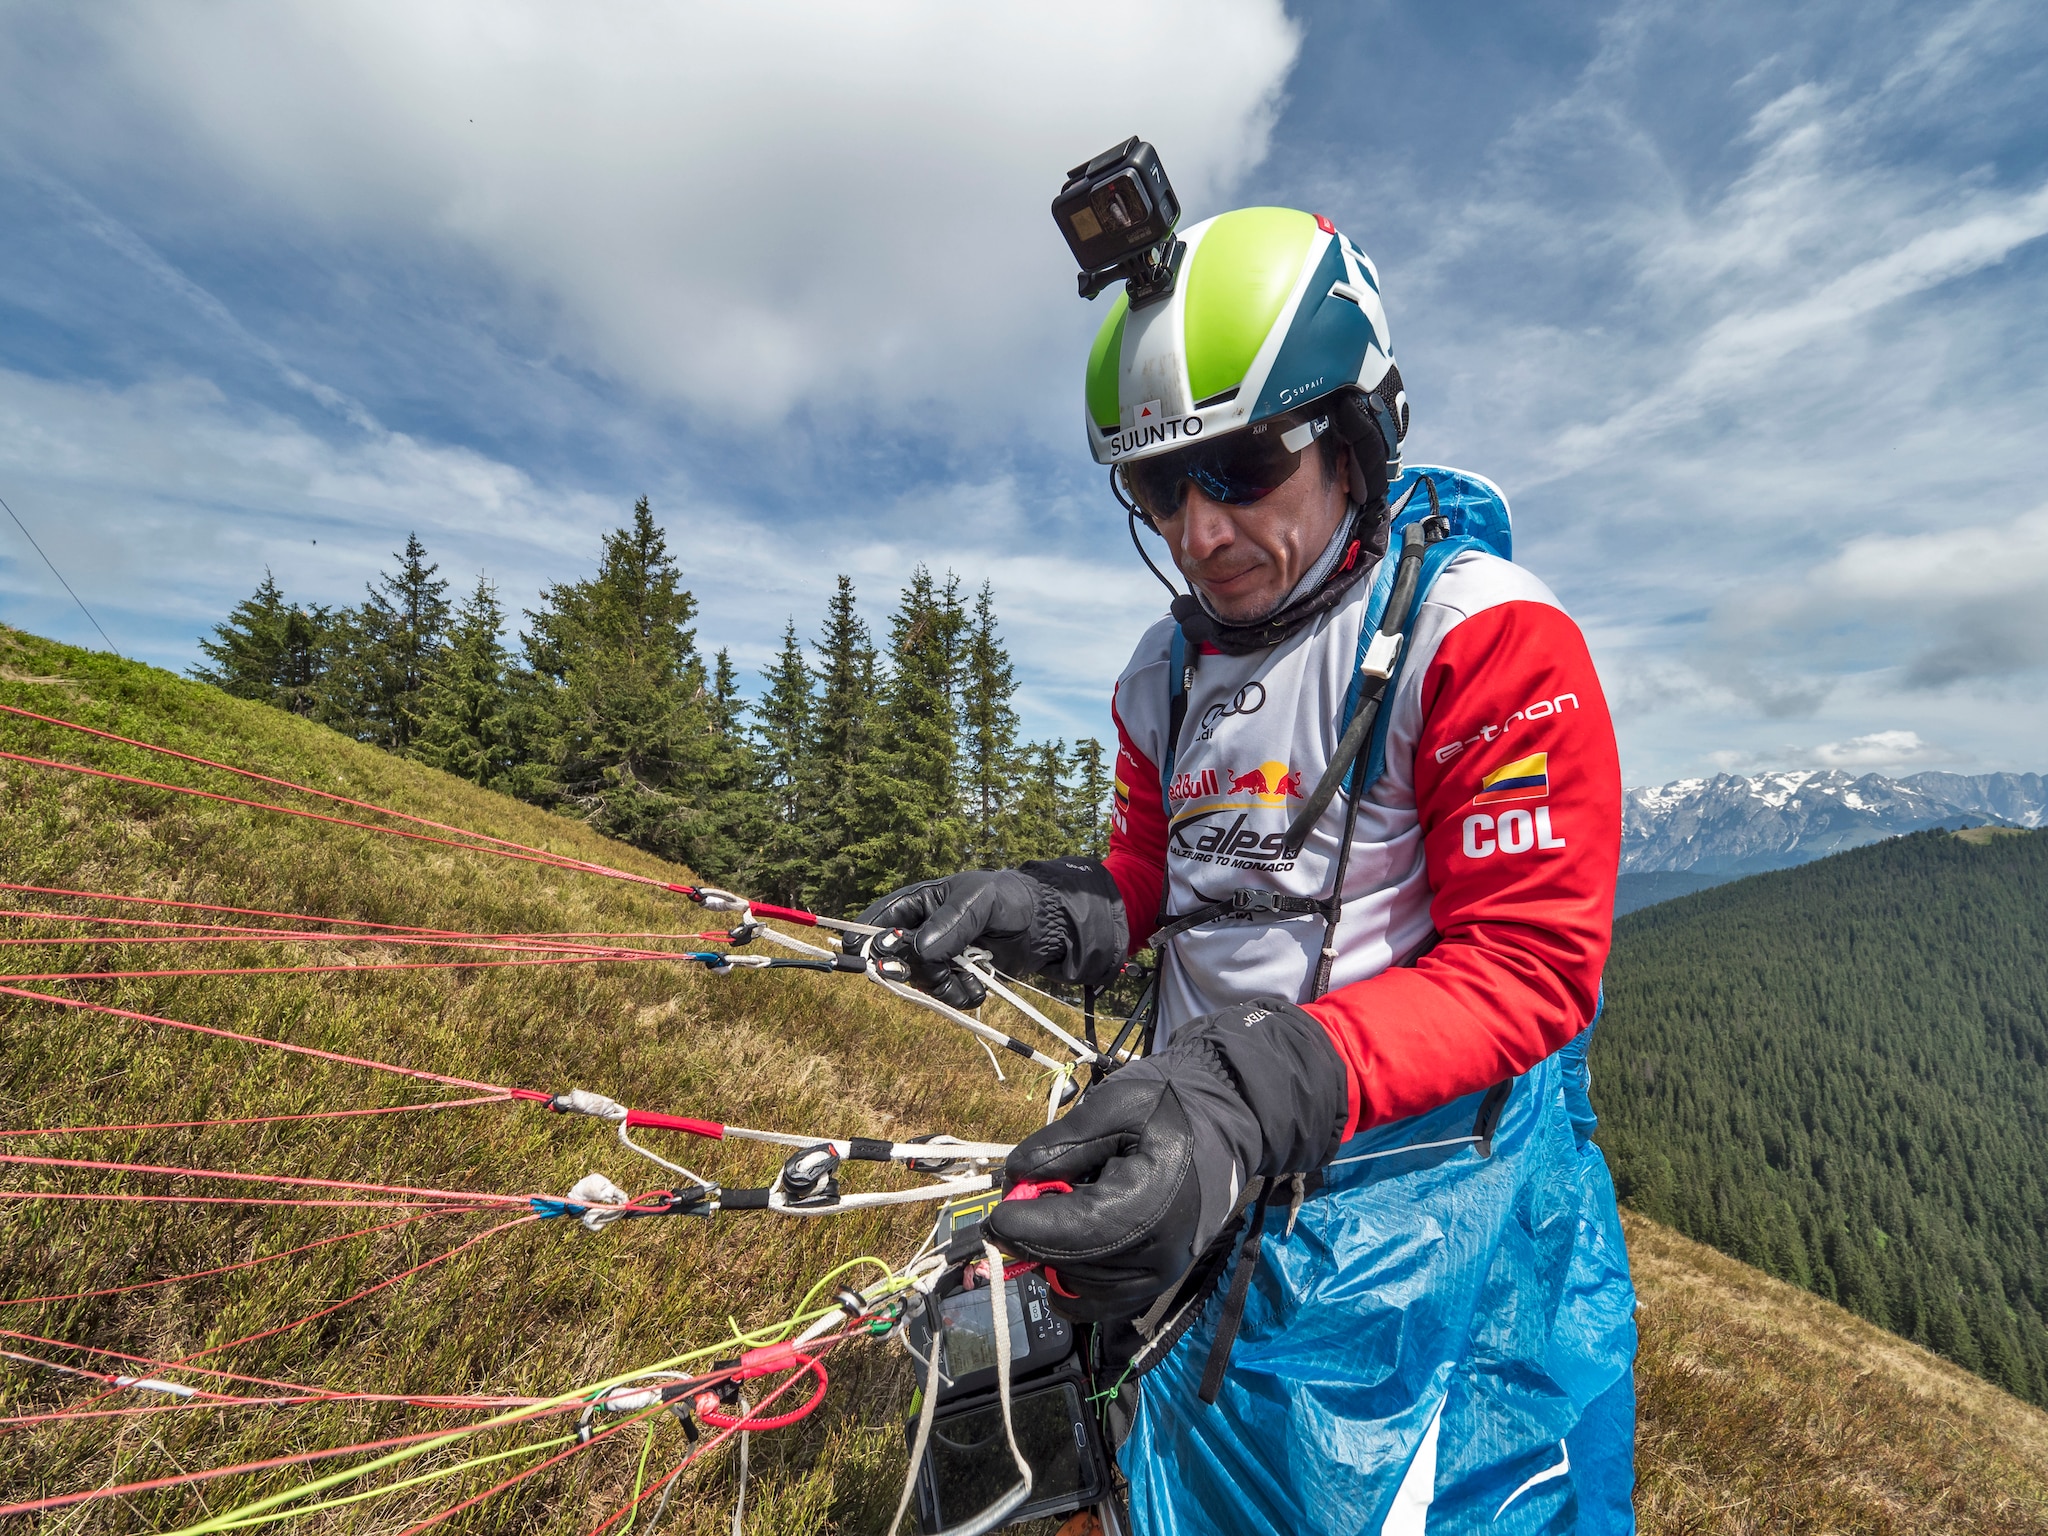 Alex Villa (COL) seen during the Red Bull X-Alps on Hochgrindeck, Austria on June 17, 2019